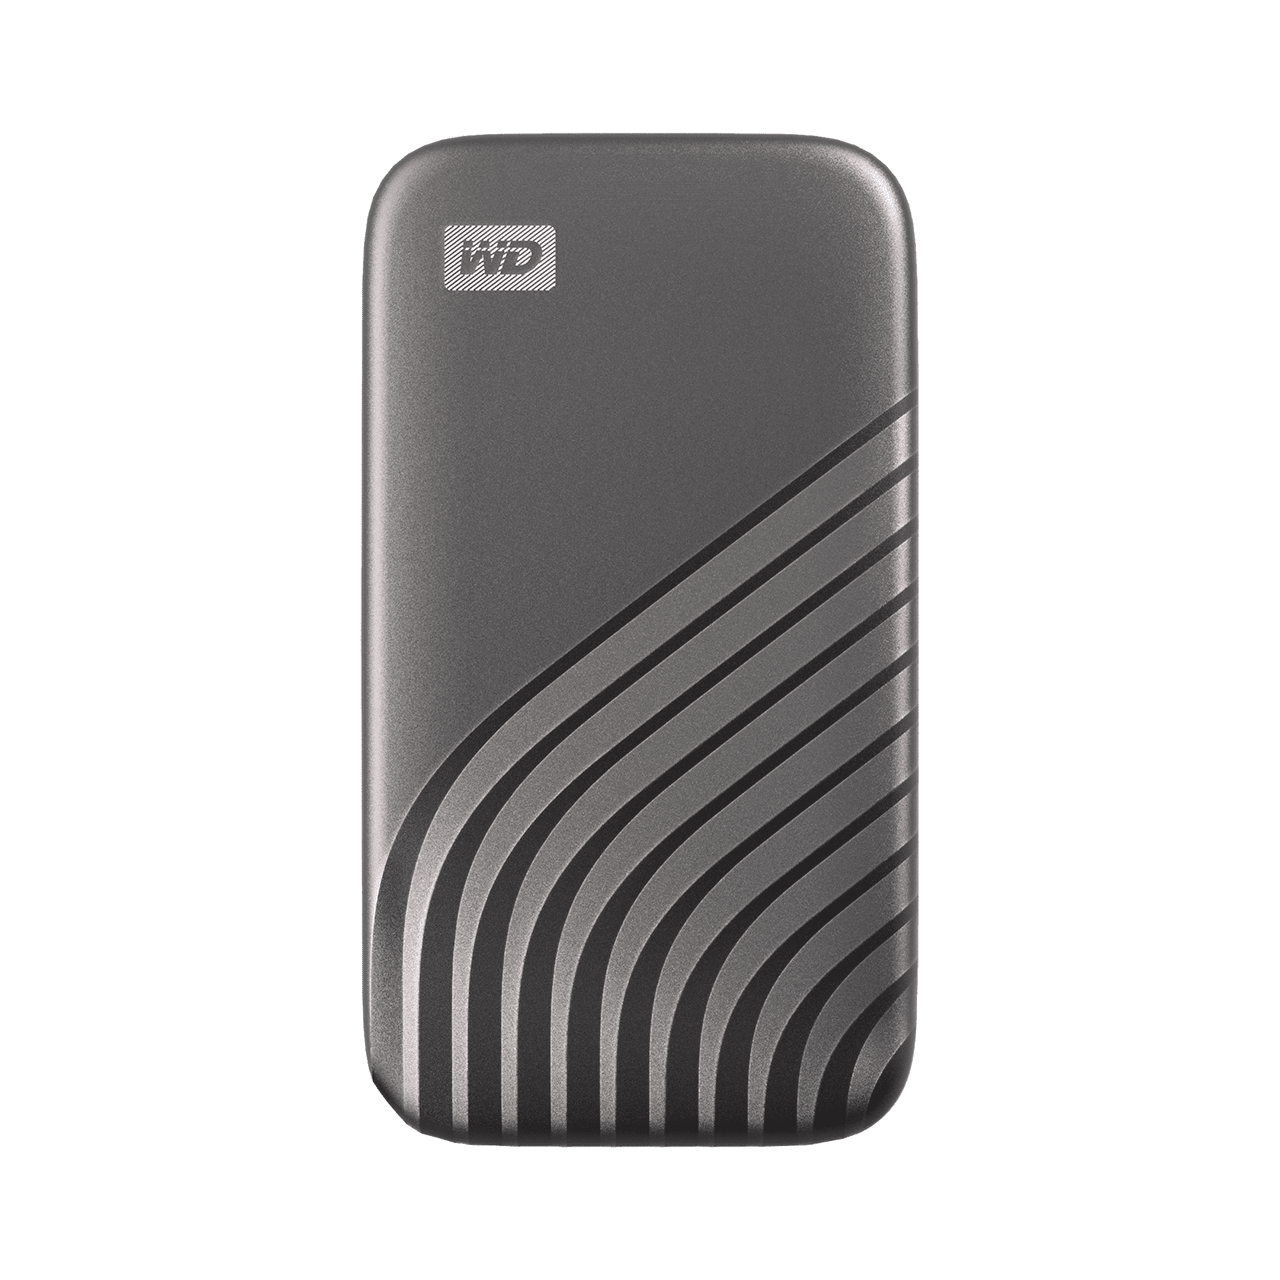 WD Western Digital My Passport SSD 500GB / 1TB Portable External SSD with USB 3.2 Gen 2, Up To 1050mb/s Read Password Protection, Simple Back Up, Shock Resistant